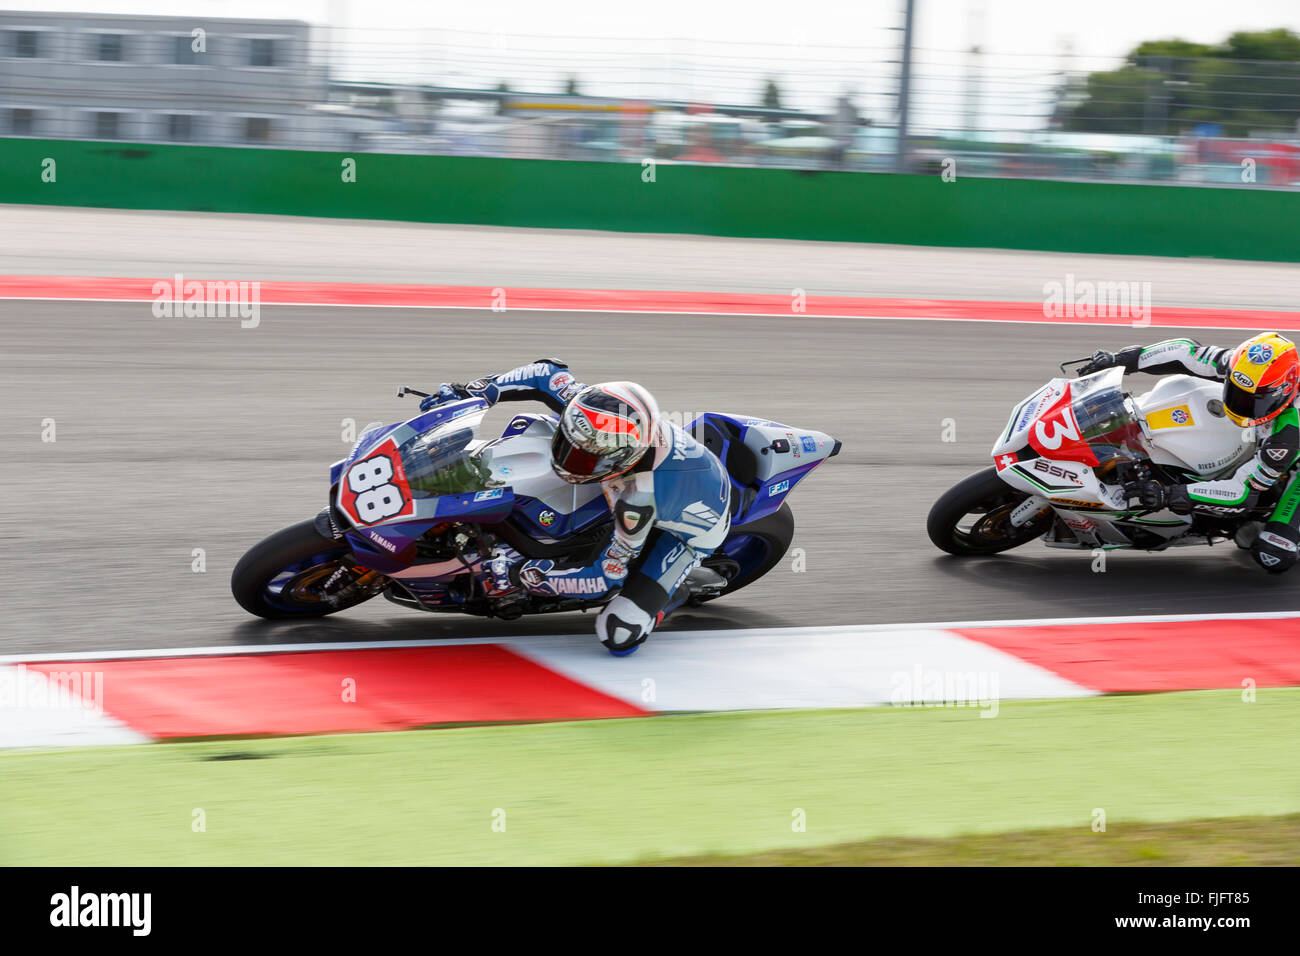 Misano Adriatico, Italy - June 21, 2015: Yamaha YZF R1 of MRS Yamaha Team, driven by COGHLAN Kev in action during the Superstock 1000 Race during the FIM Superstock 1000 - race at Misano World Circuit on June 21, 2015 in Misano Adriatico, Italy. Stock Photo